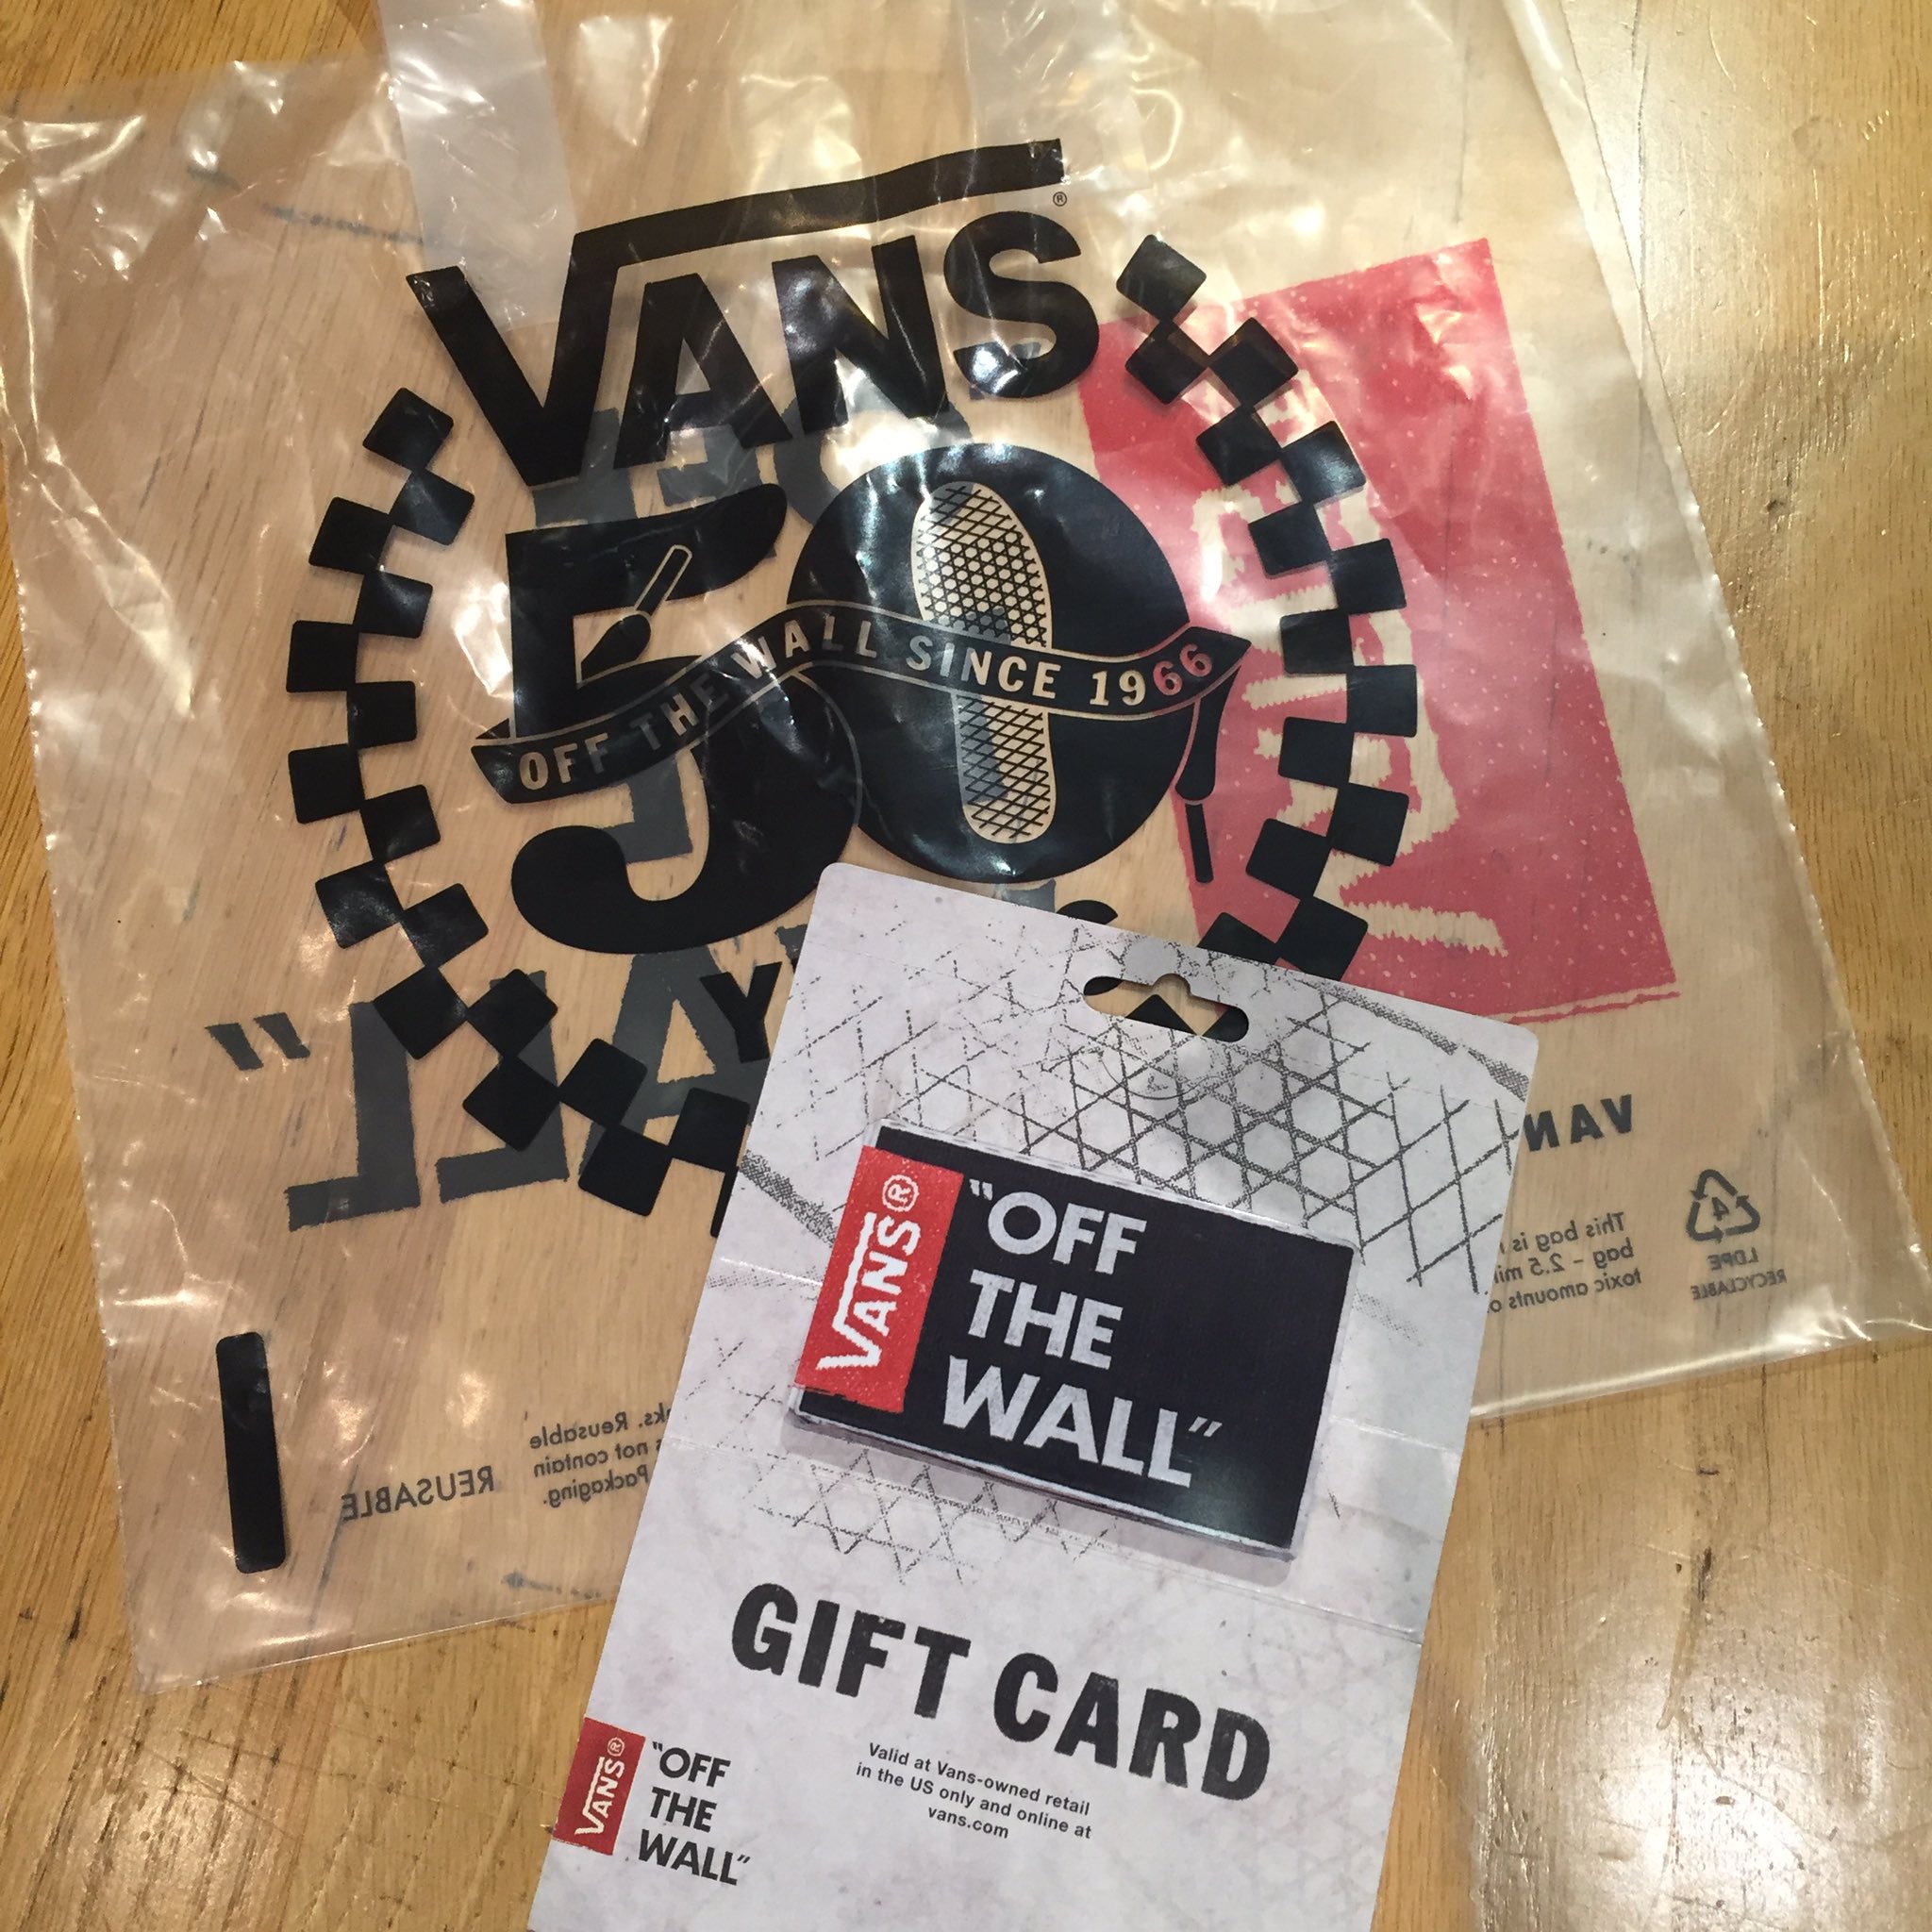 Balehval Afledning Blodig Vans Alert on Twitter: "Free $100 Vans Gift Card To enter: 1.) Retweet 2.)  Must be following! I will randomly select the winner at noon pacific time  tomorrow. https://t.co/cZKVUVpKTi" / Twitter